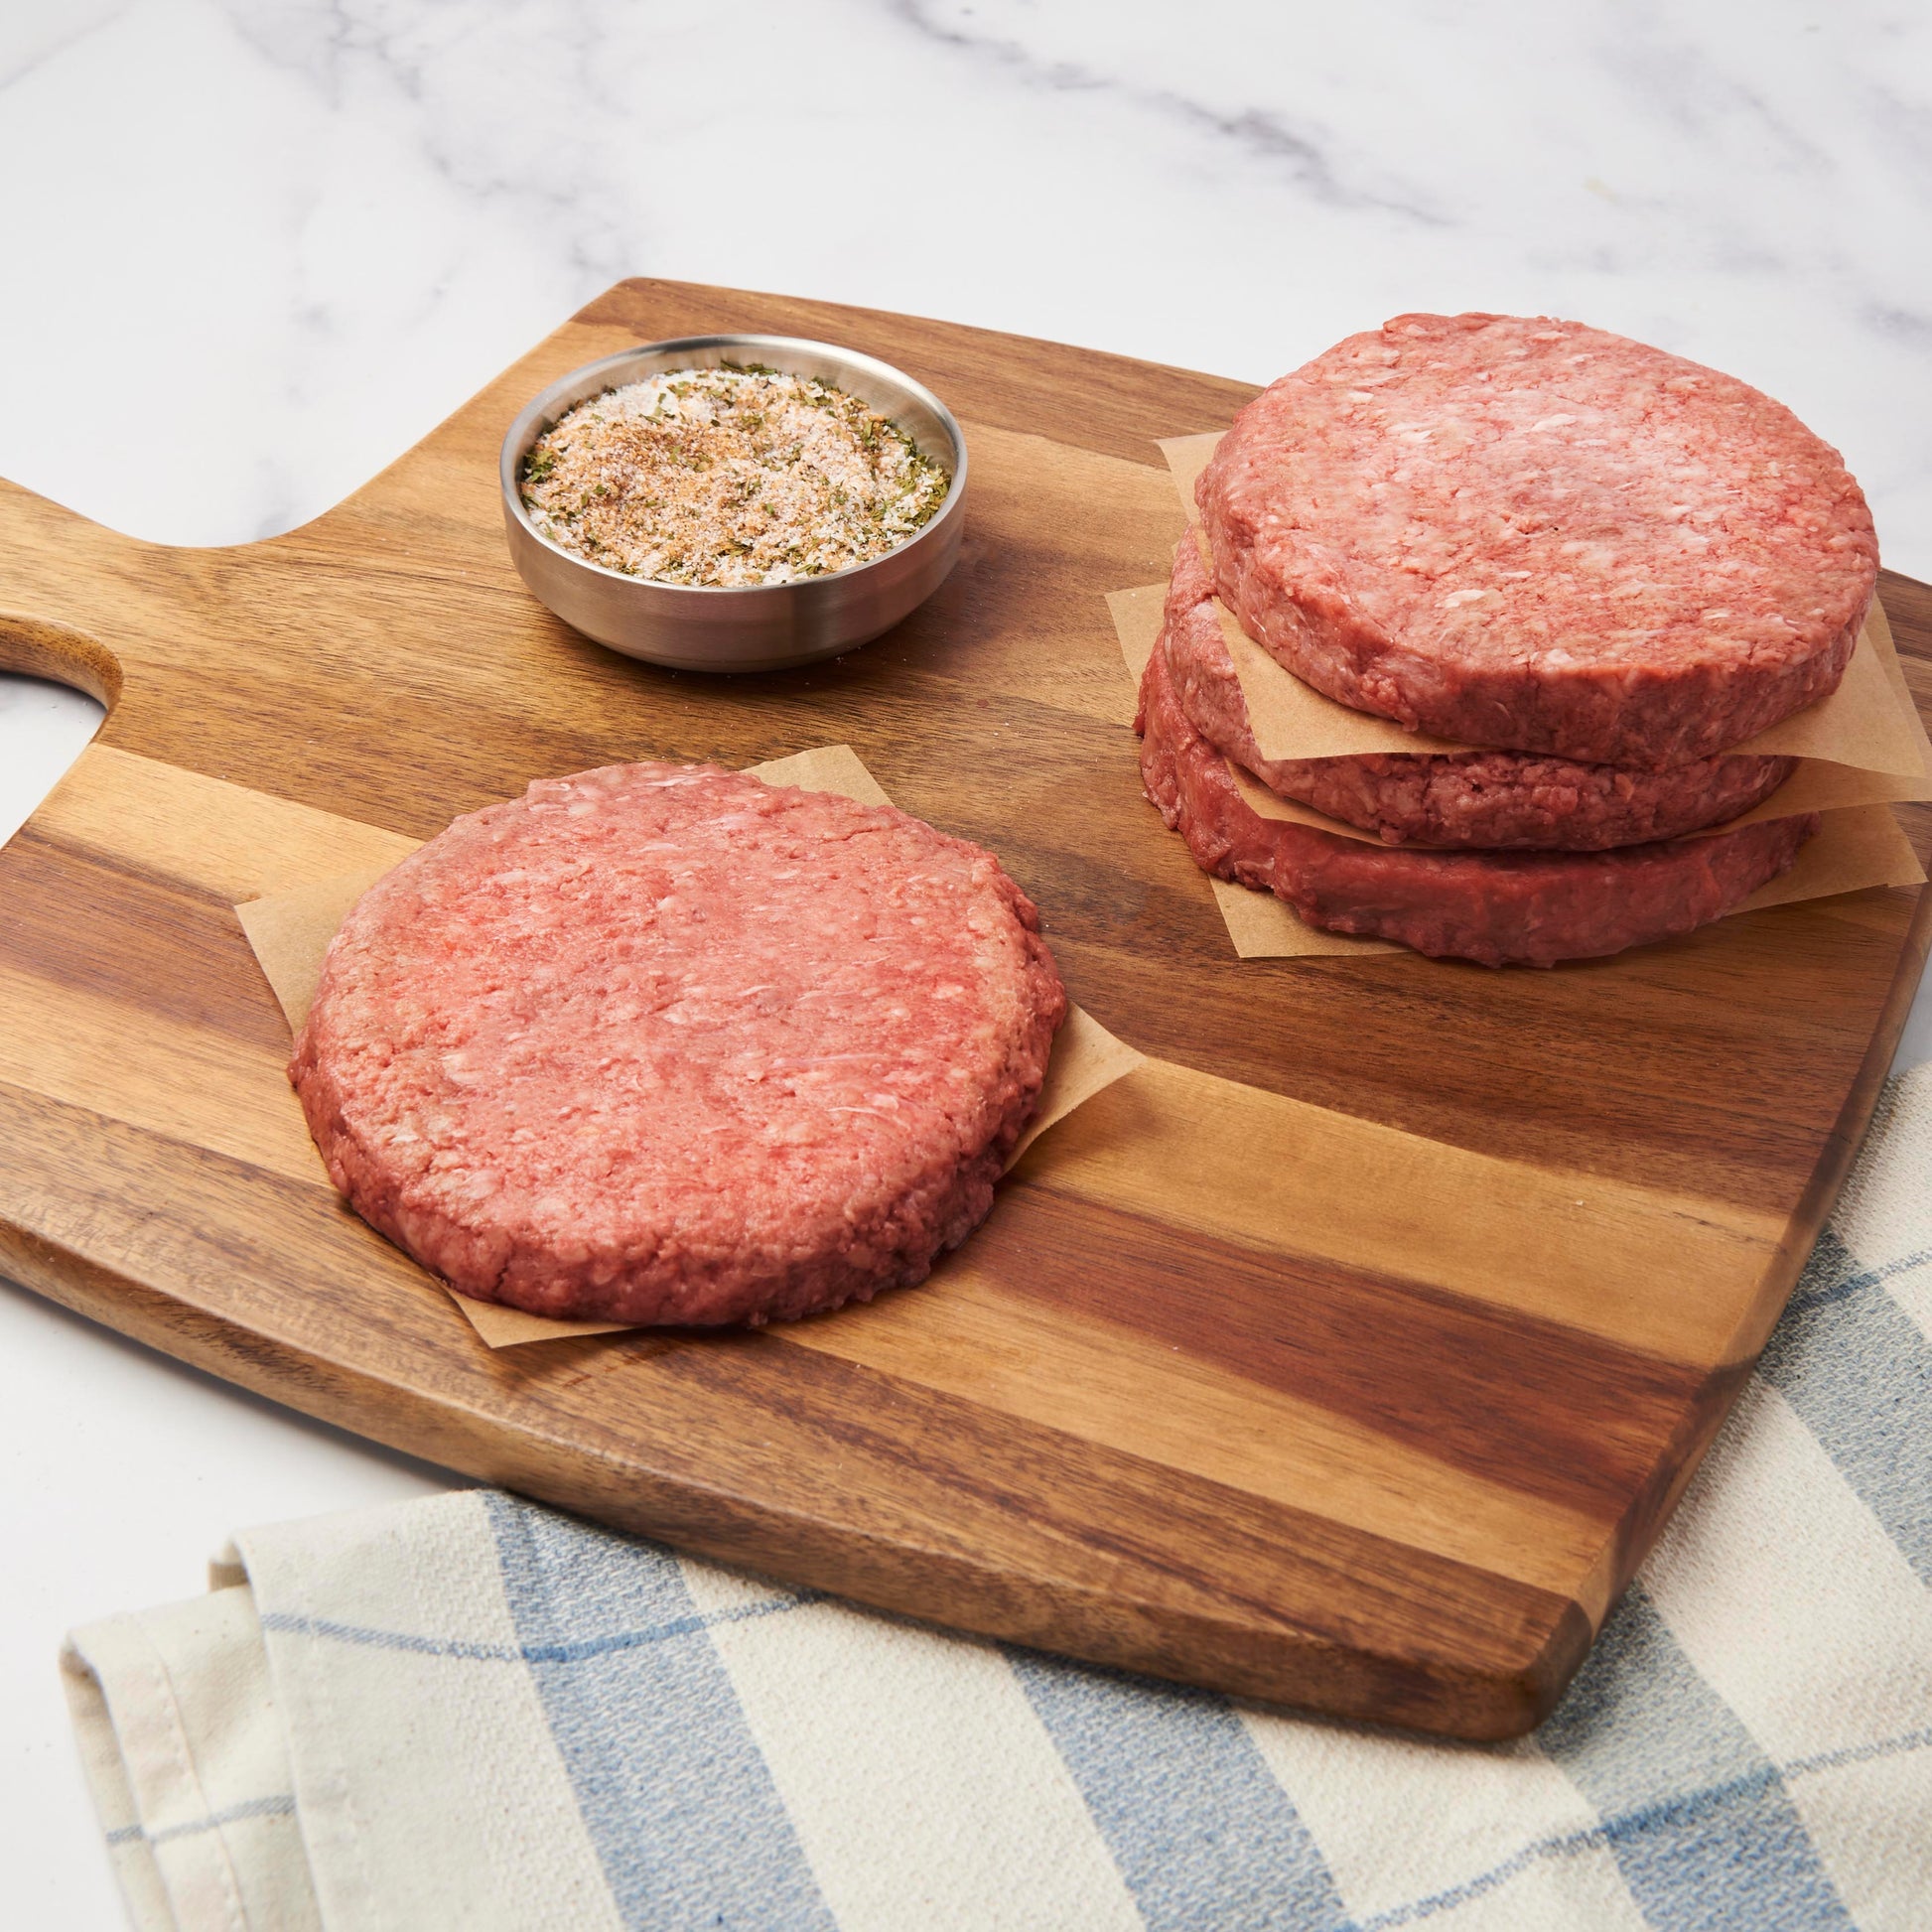 Raw A5 Blend Burgers on cutting board with salt ready to be cooked